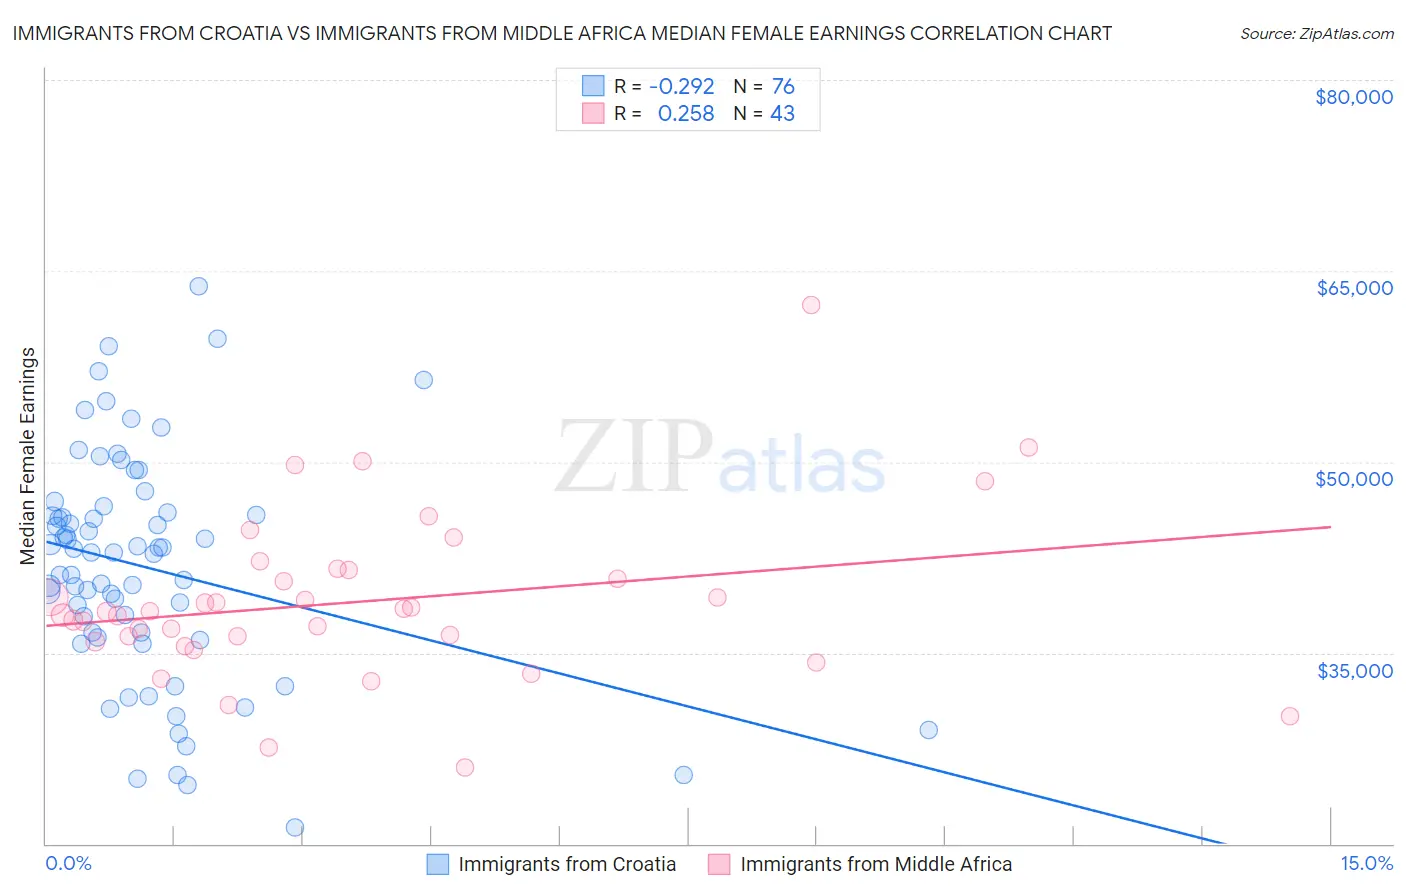 Immigrants from Croatia vs Immigrants from Middle Africa Median Female Earnings